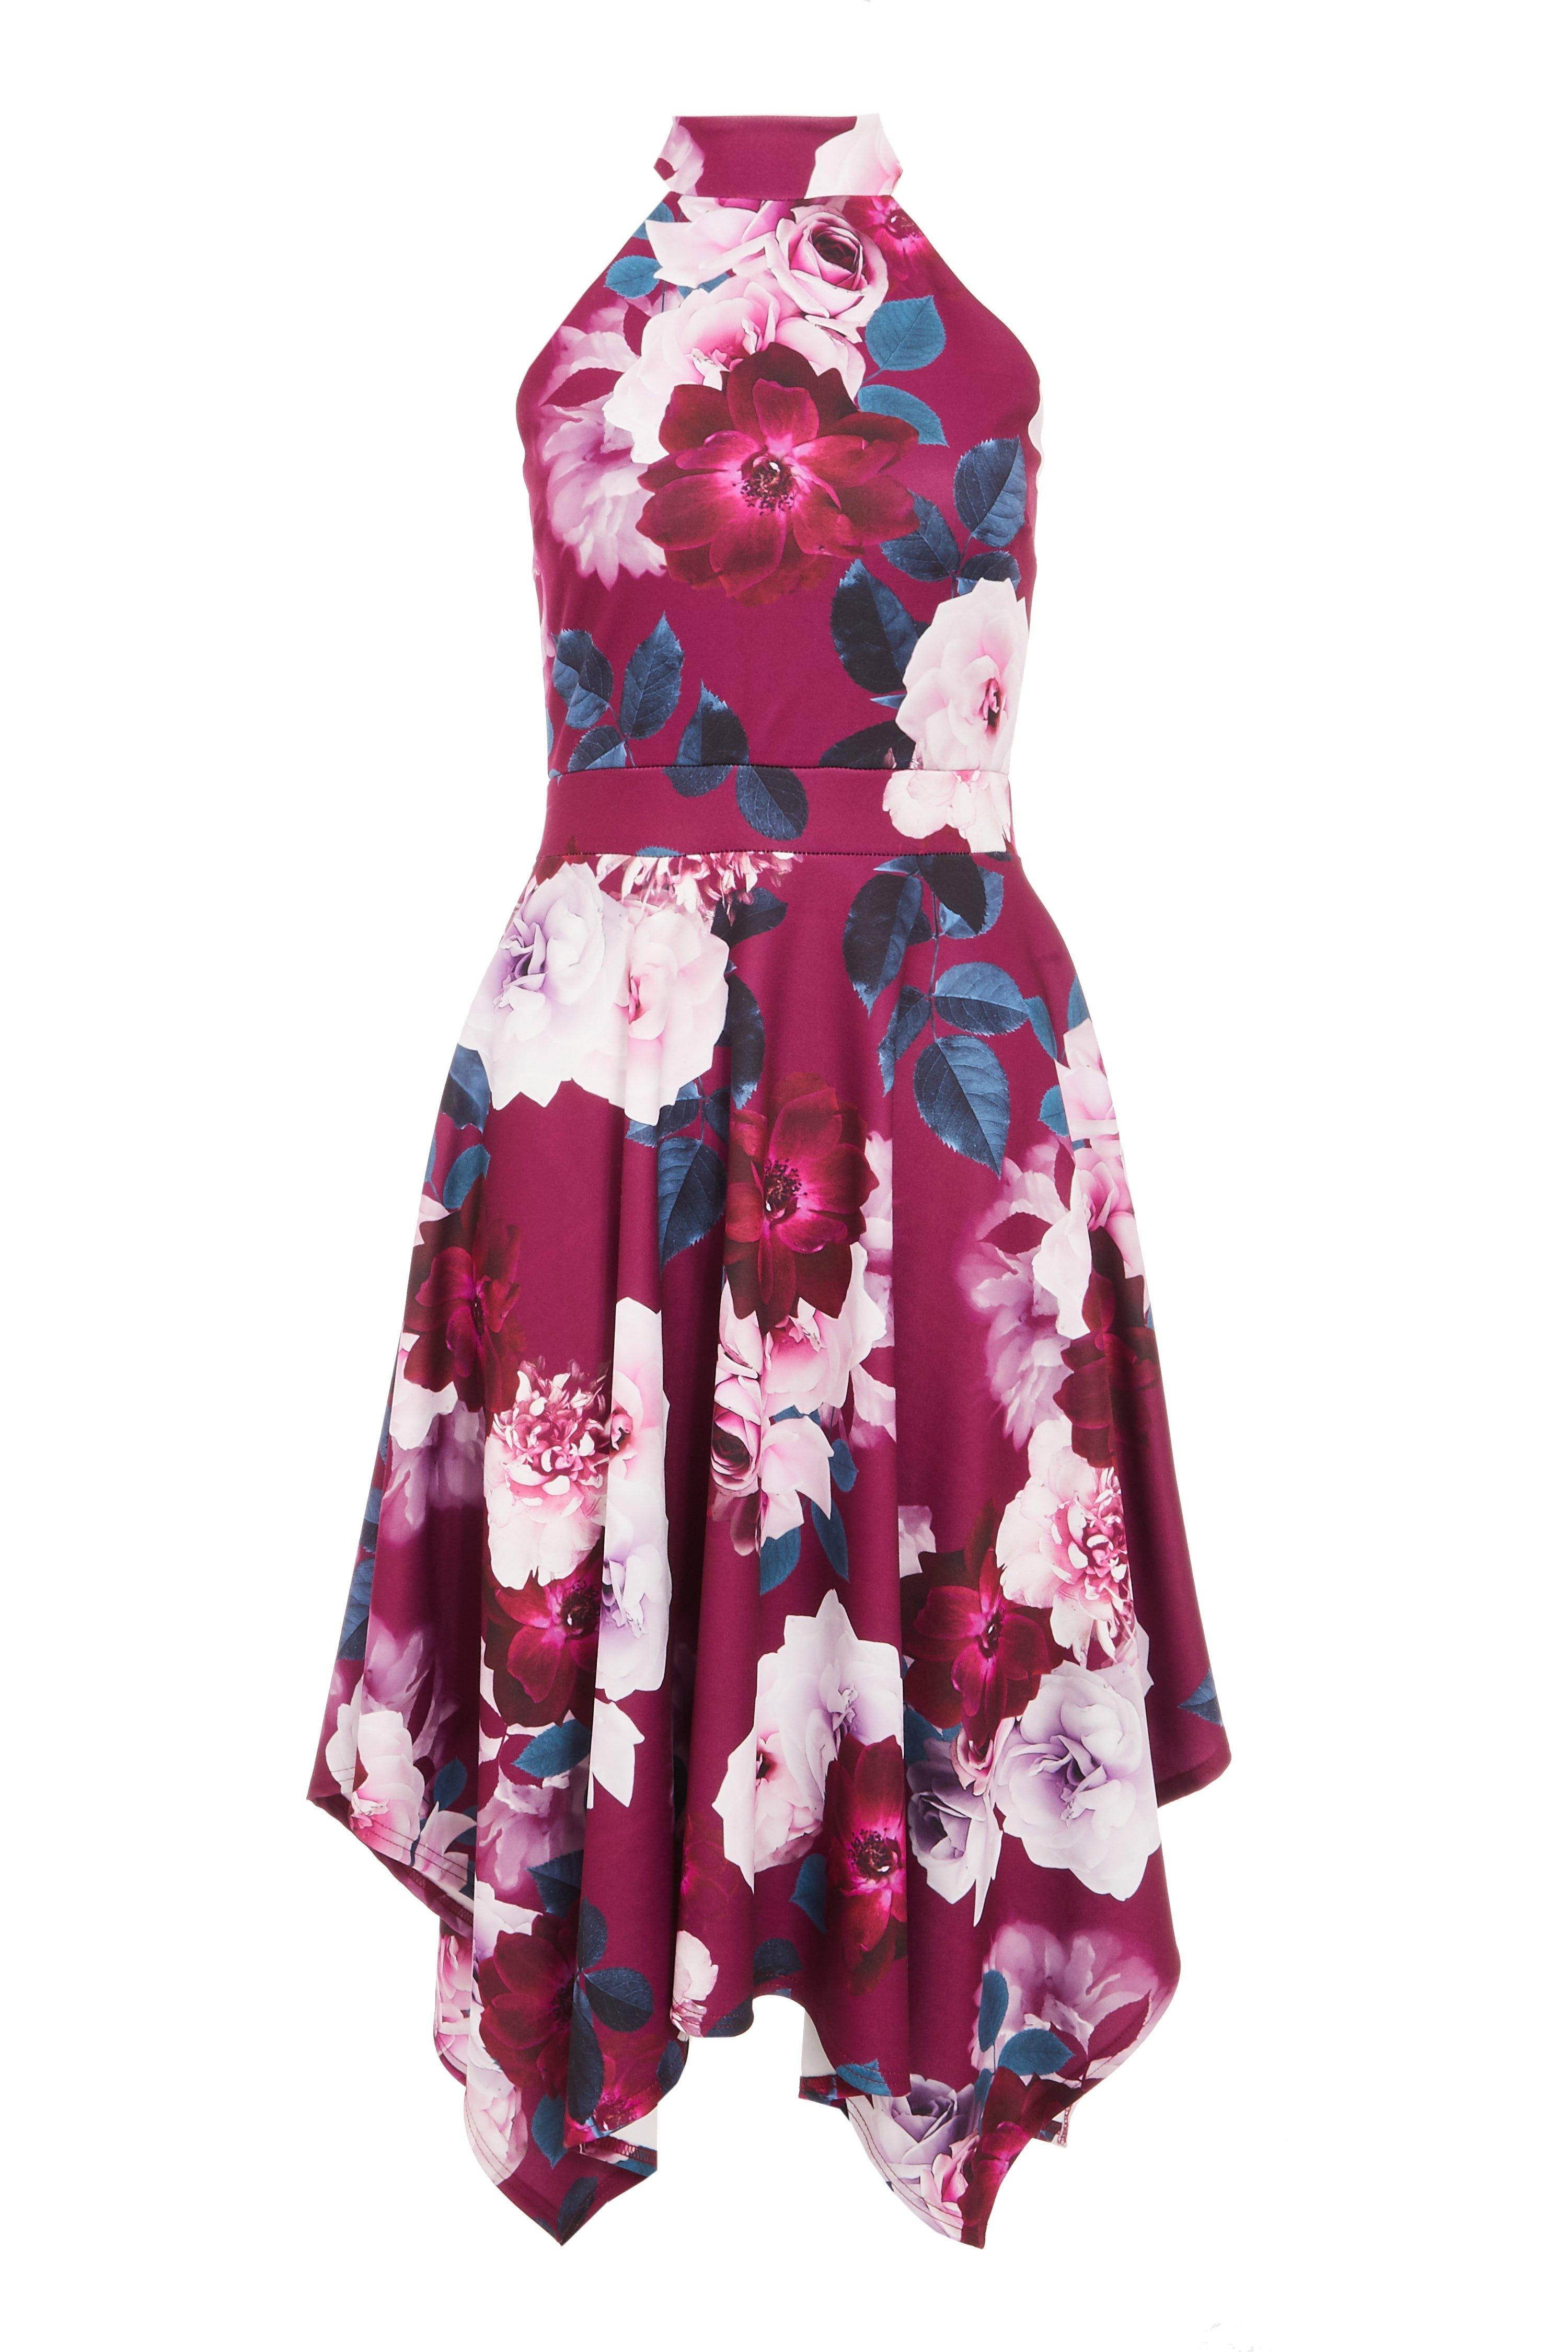 Berry and Teal Floral Print Hanky Hem Dress - Quiz Clothing